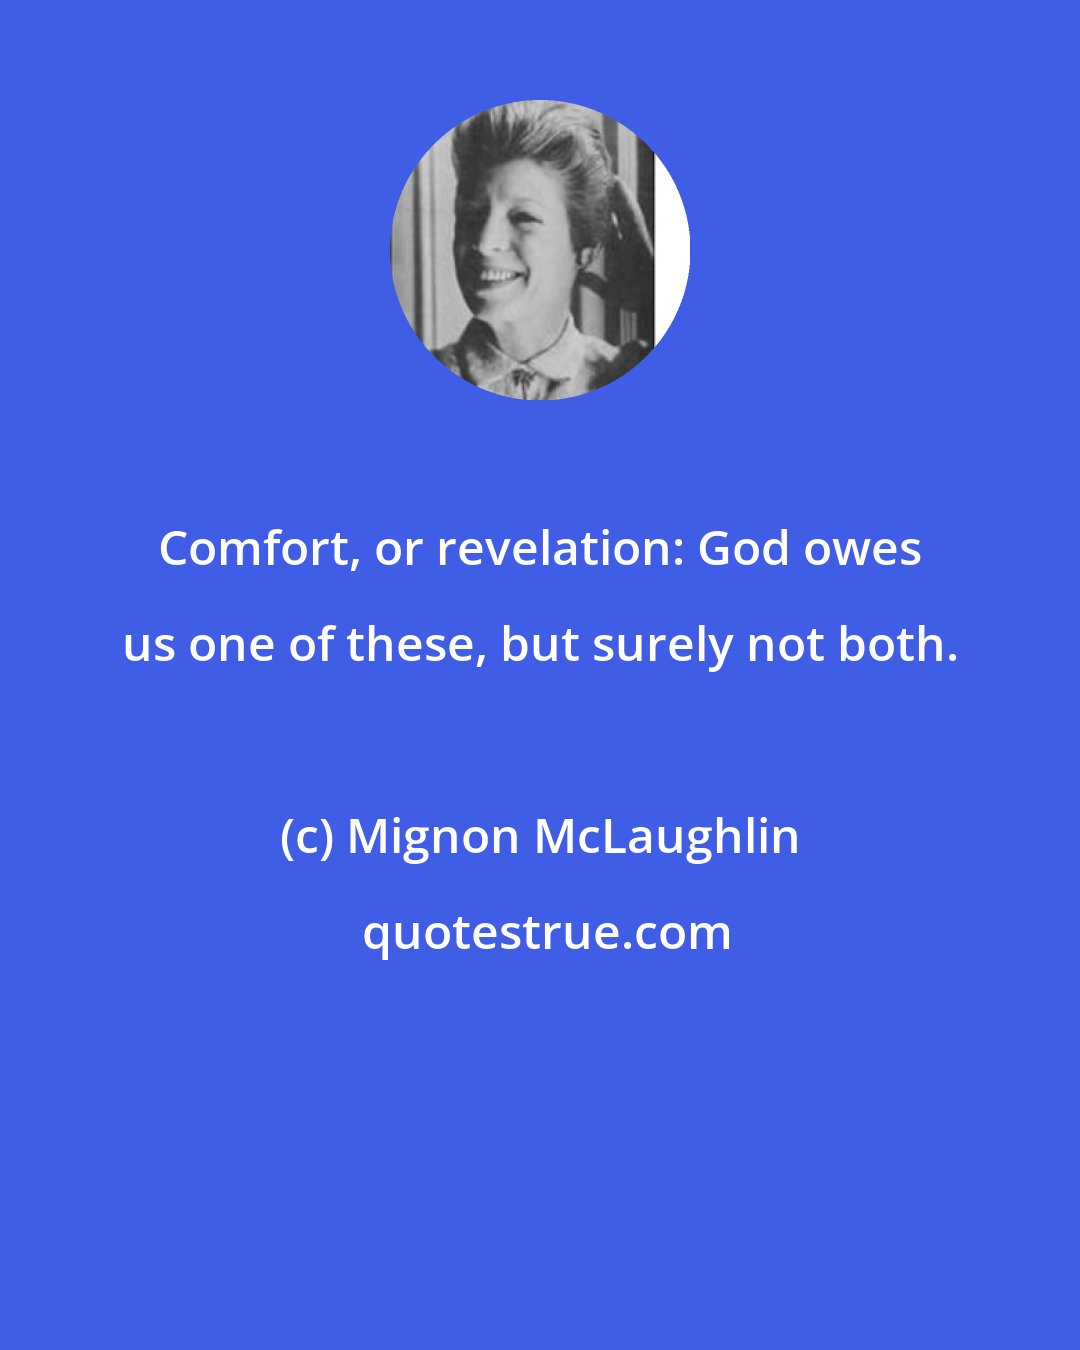 Mignon McLaughlin: Comfort, or revelation: God owes us one of these, but surely not both.